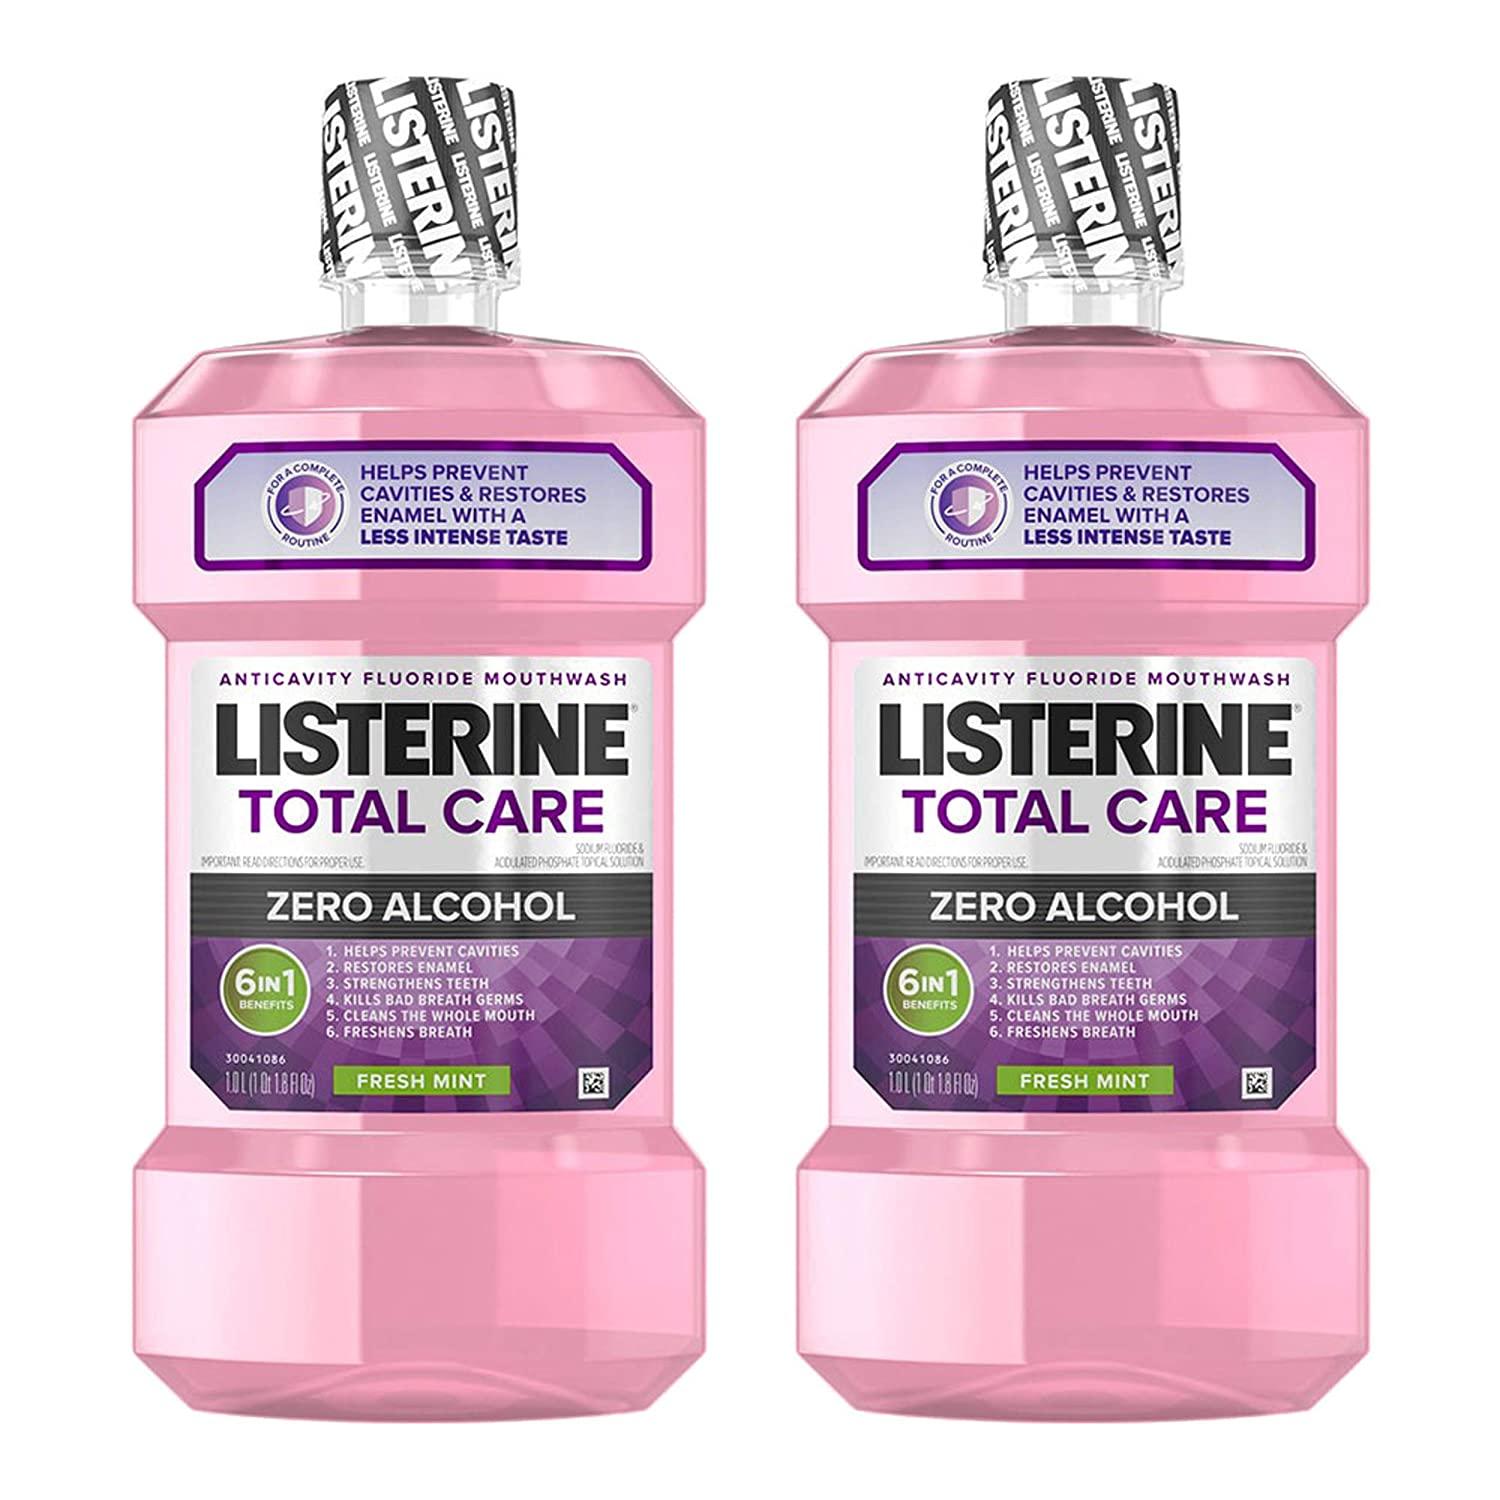 2 Listerine Total Care Anticavity Mouthwash with Biotene Oral Rinse for $10.21